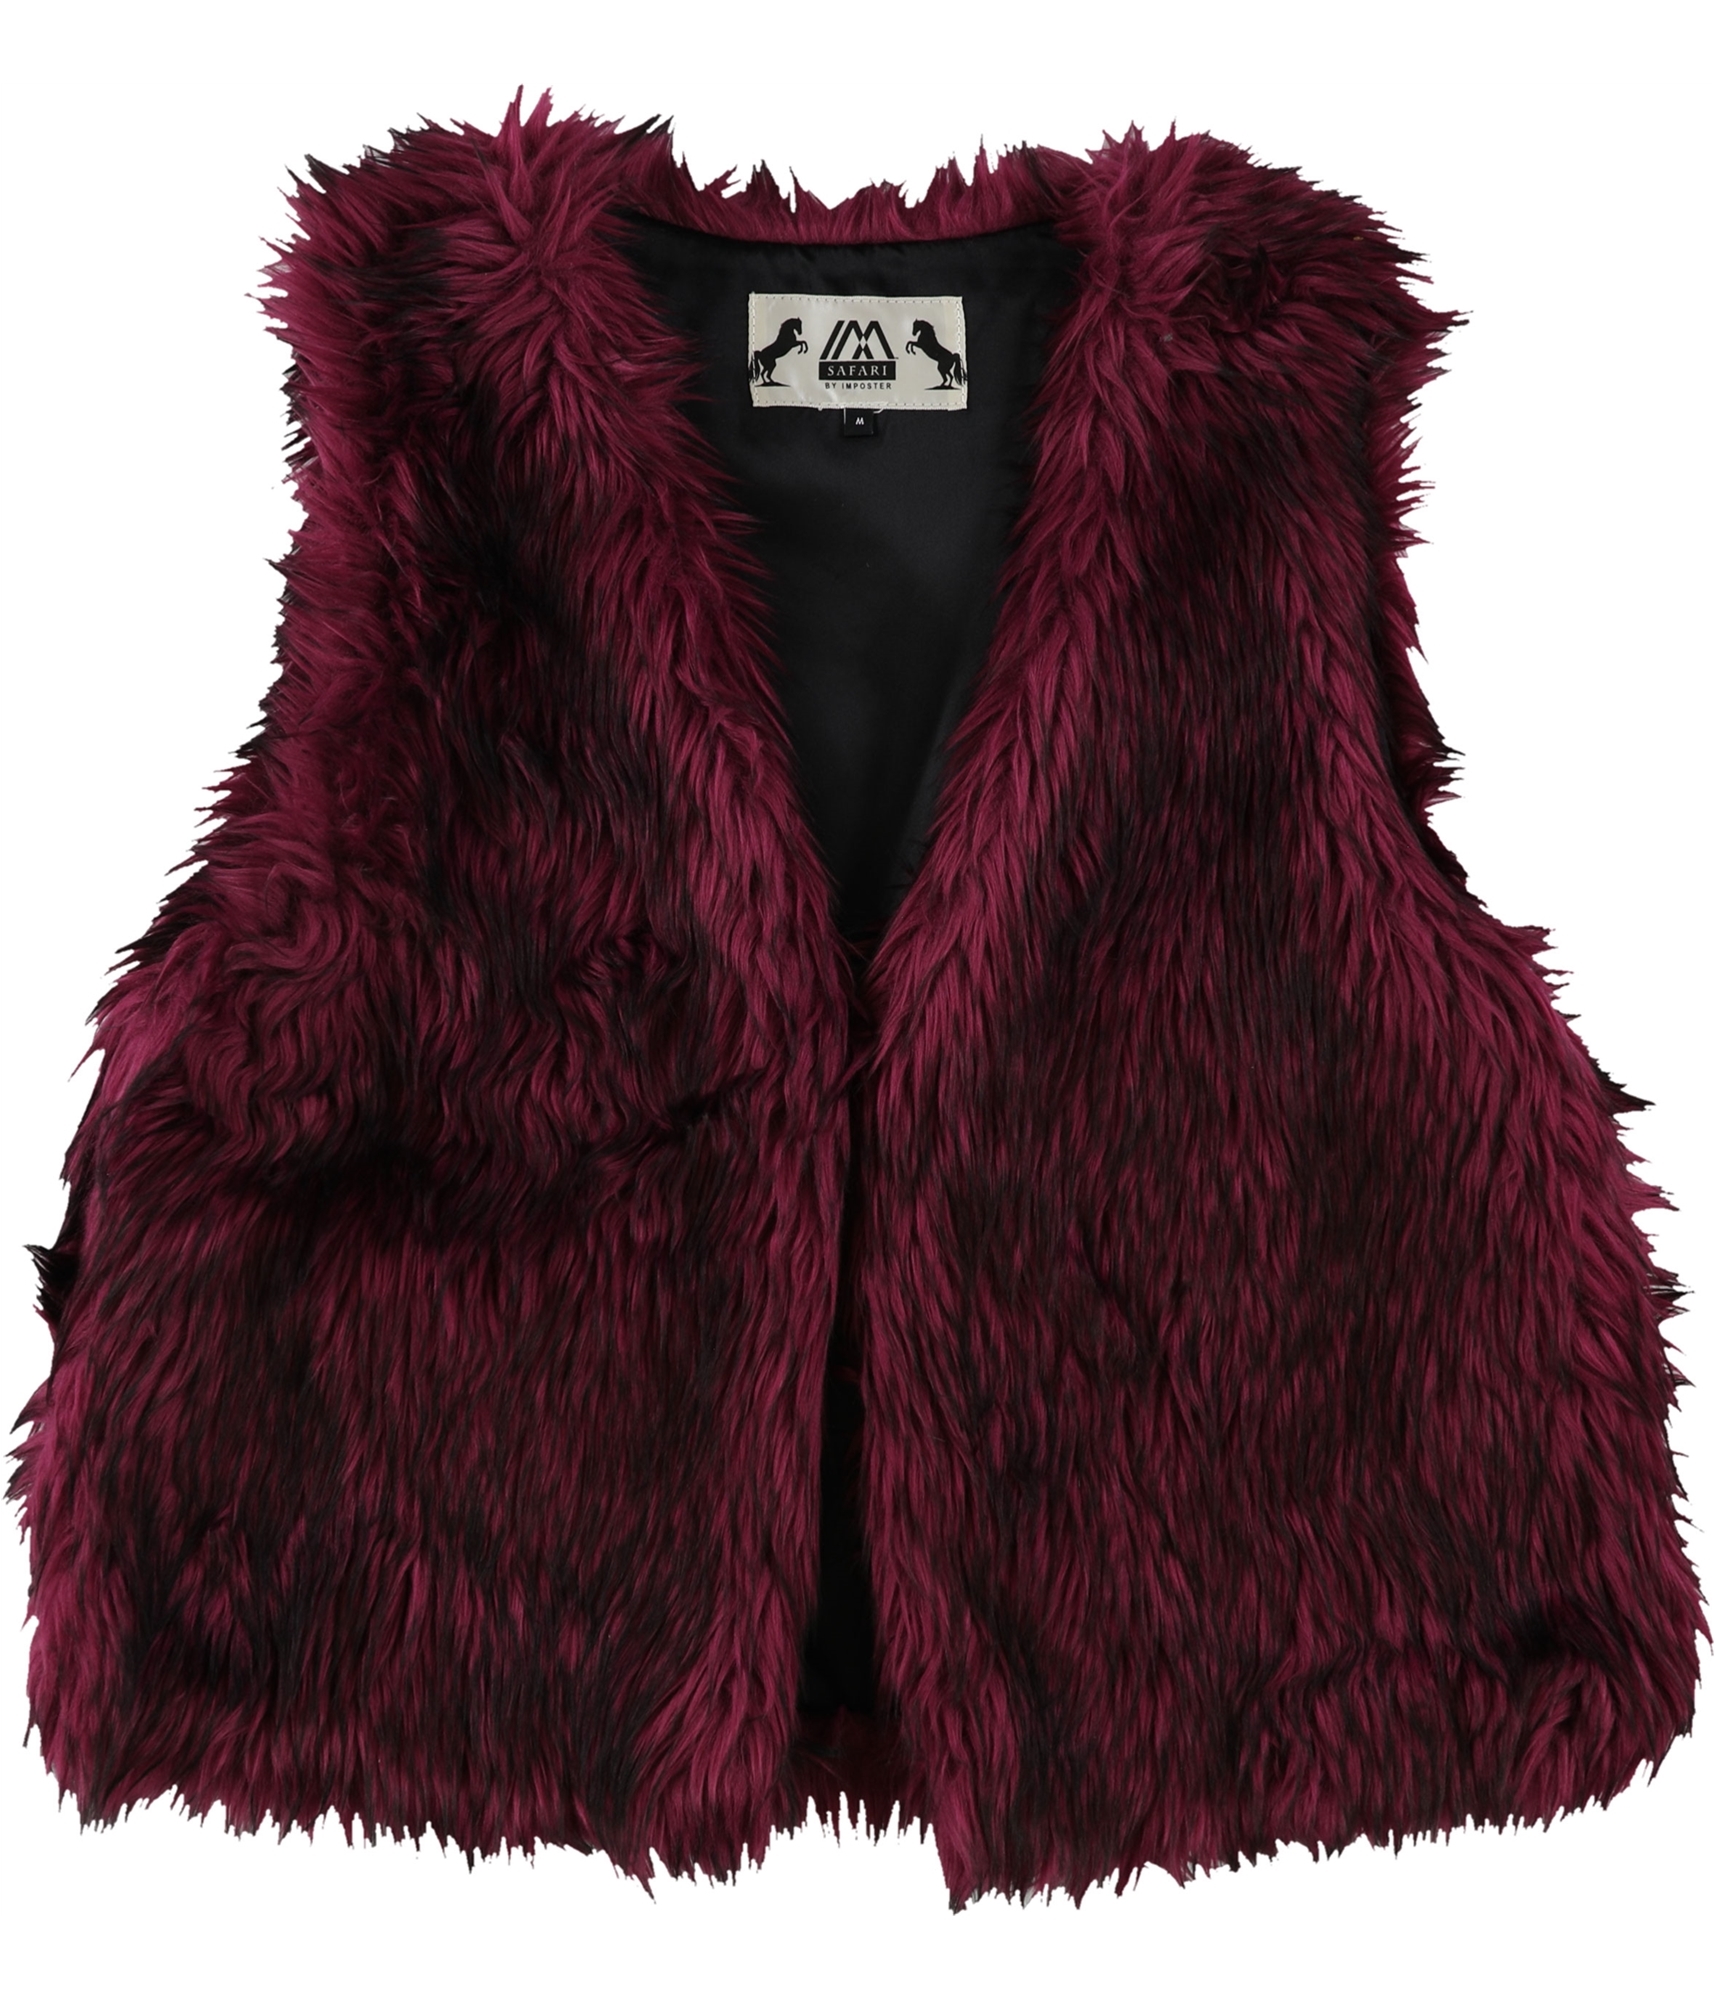 Buy a Womens Safari By Imposter Faux Fur Sweater Vest Online |  TagsWeekly.com